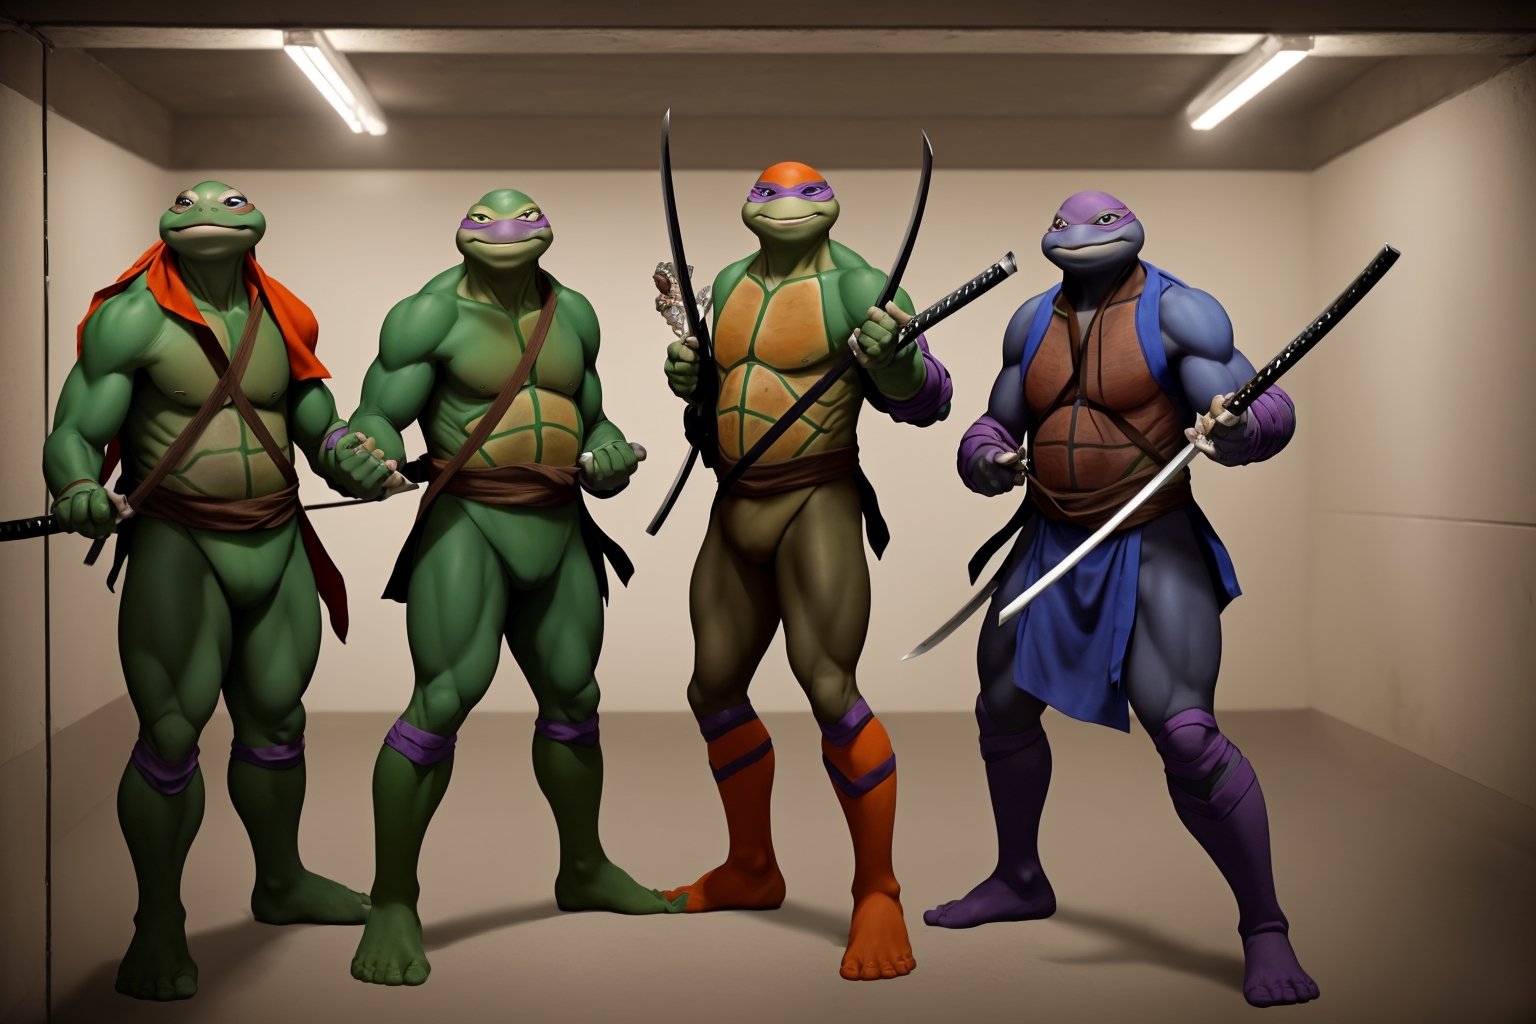 In the NYC sewer, decorated for Christmas, 

a funny Christmas family photo of the (four) ((Teenage Mutant Ninja Turtles) (TMNT),green turtles,

<Leonardo wields two katana and wears a blue bandana> 
<Raphael wears a red bandana and uses a pair of sai>
<Donatello wears a purple bandana and uses a bō staff> 
<Michelangelo wears an orange bandana and uses nunchucks>

